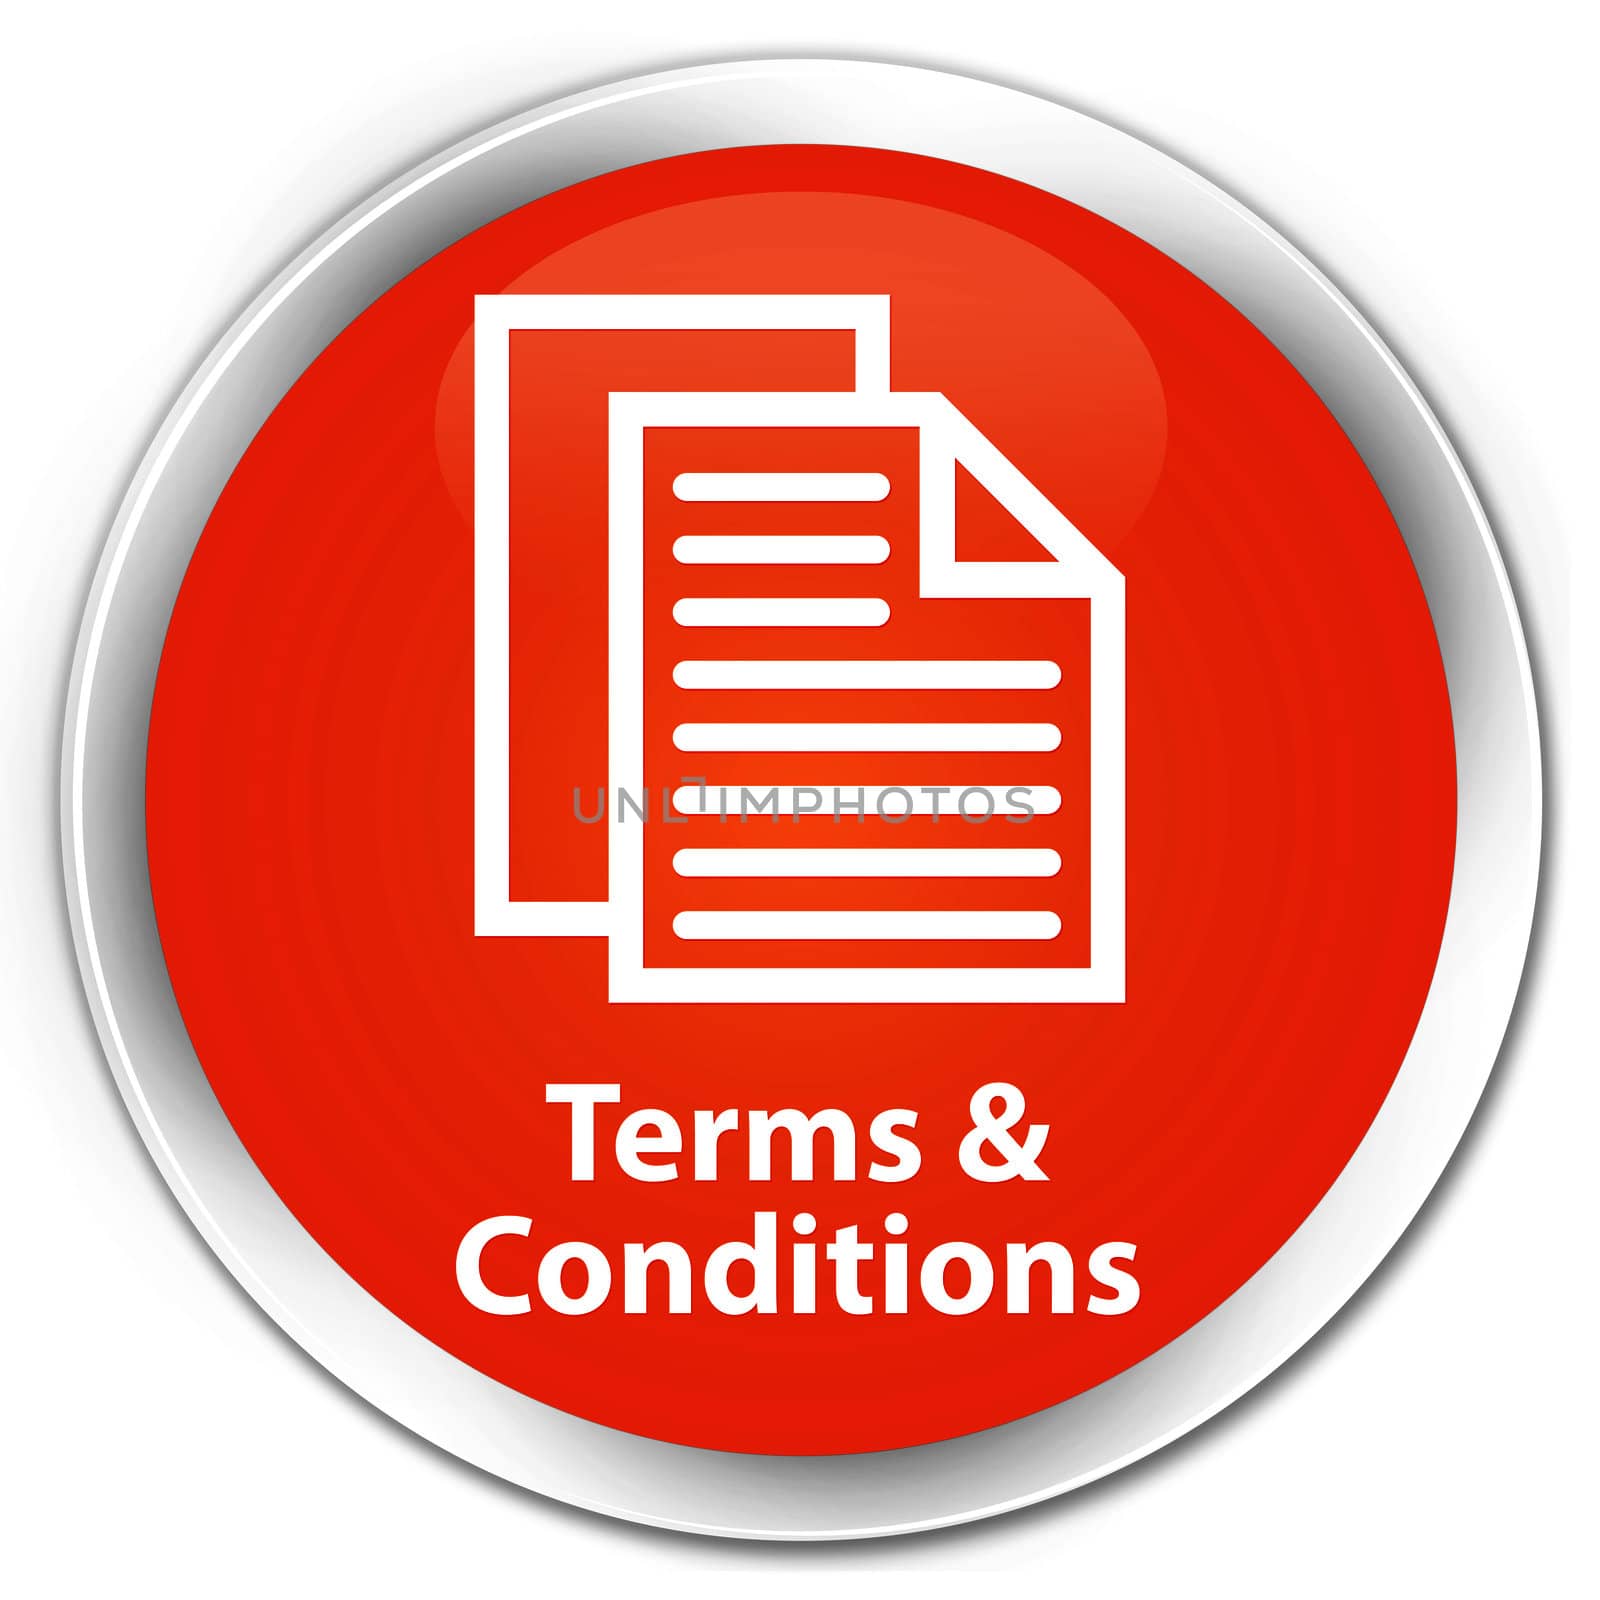 Terms & Conditions glossy orange round button